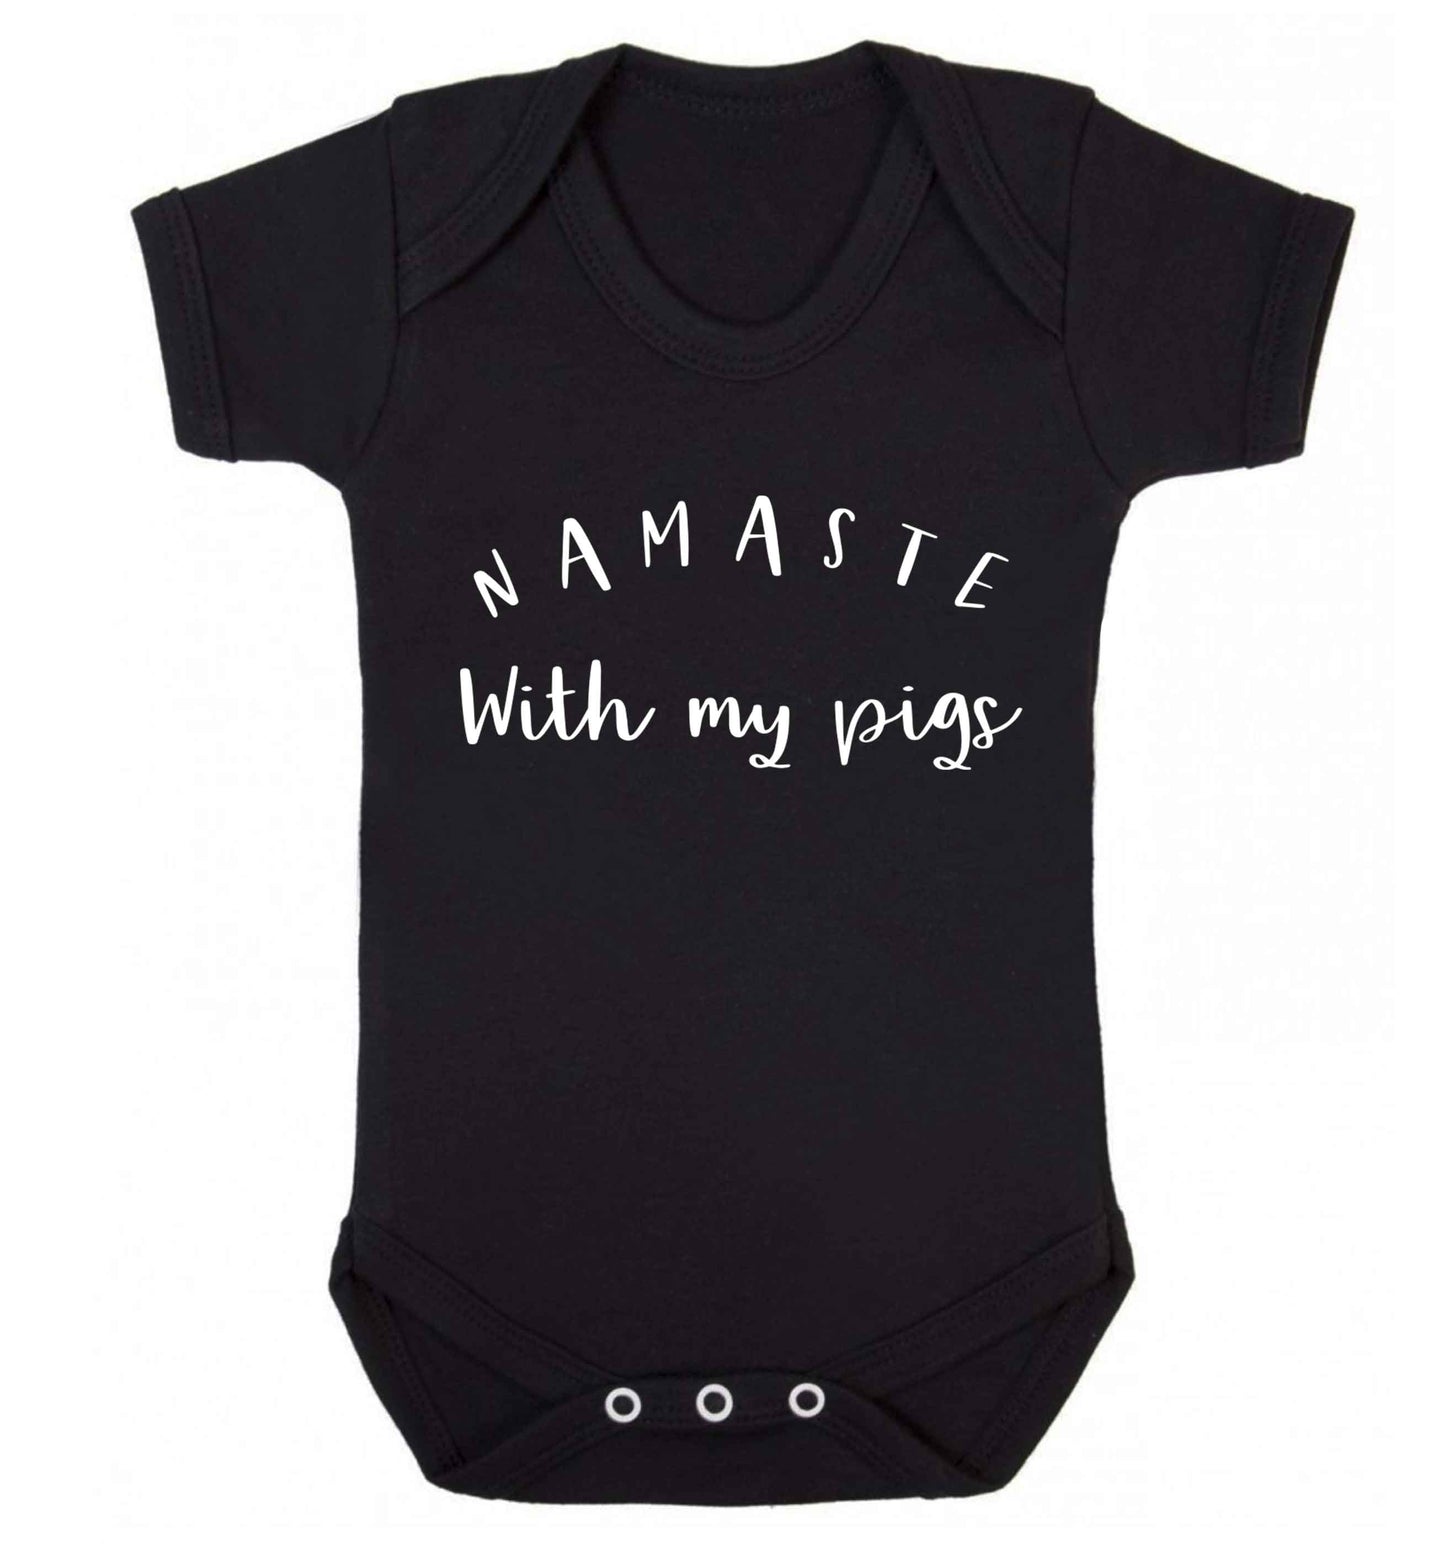 Namaste with my pigs Baby Vest black 18-24 months